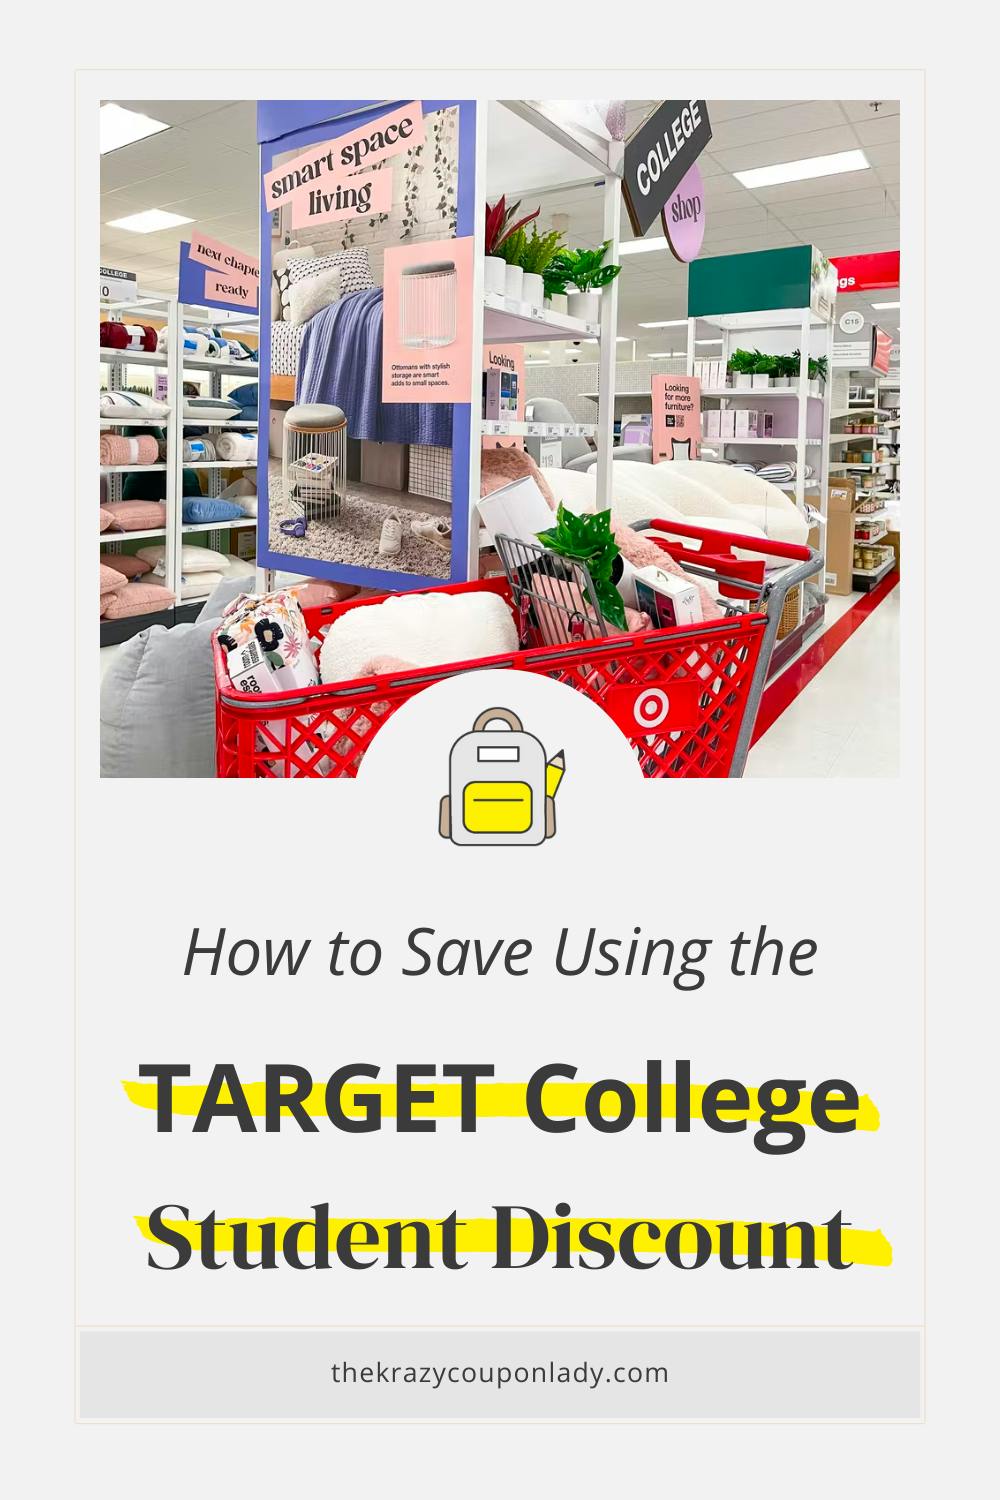 Target College Student Discount: Save 20% on Backpacks and Cleaning Supplies